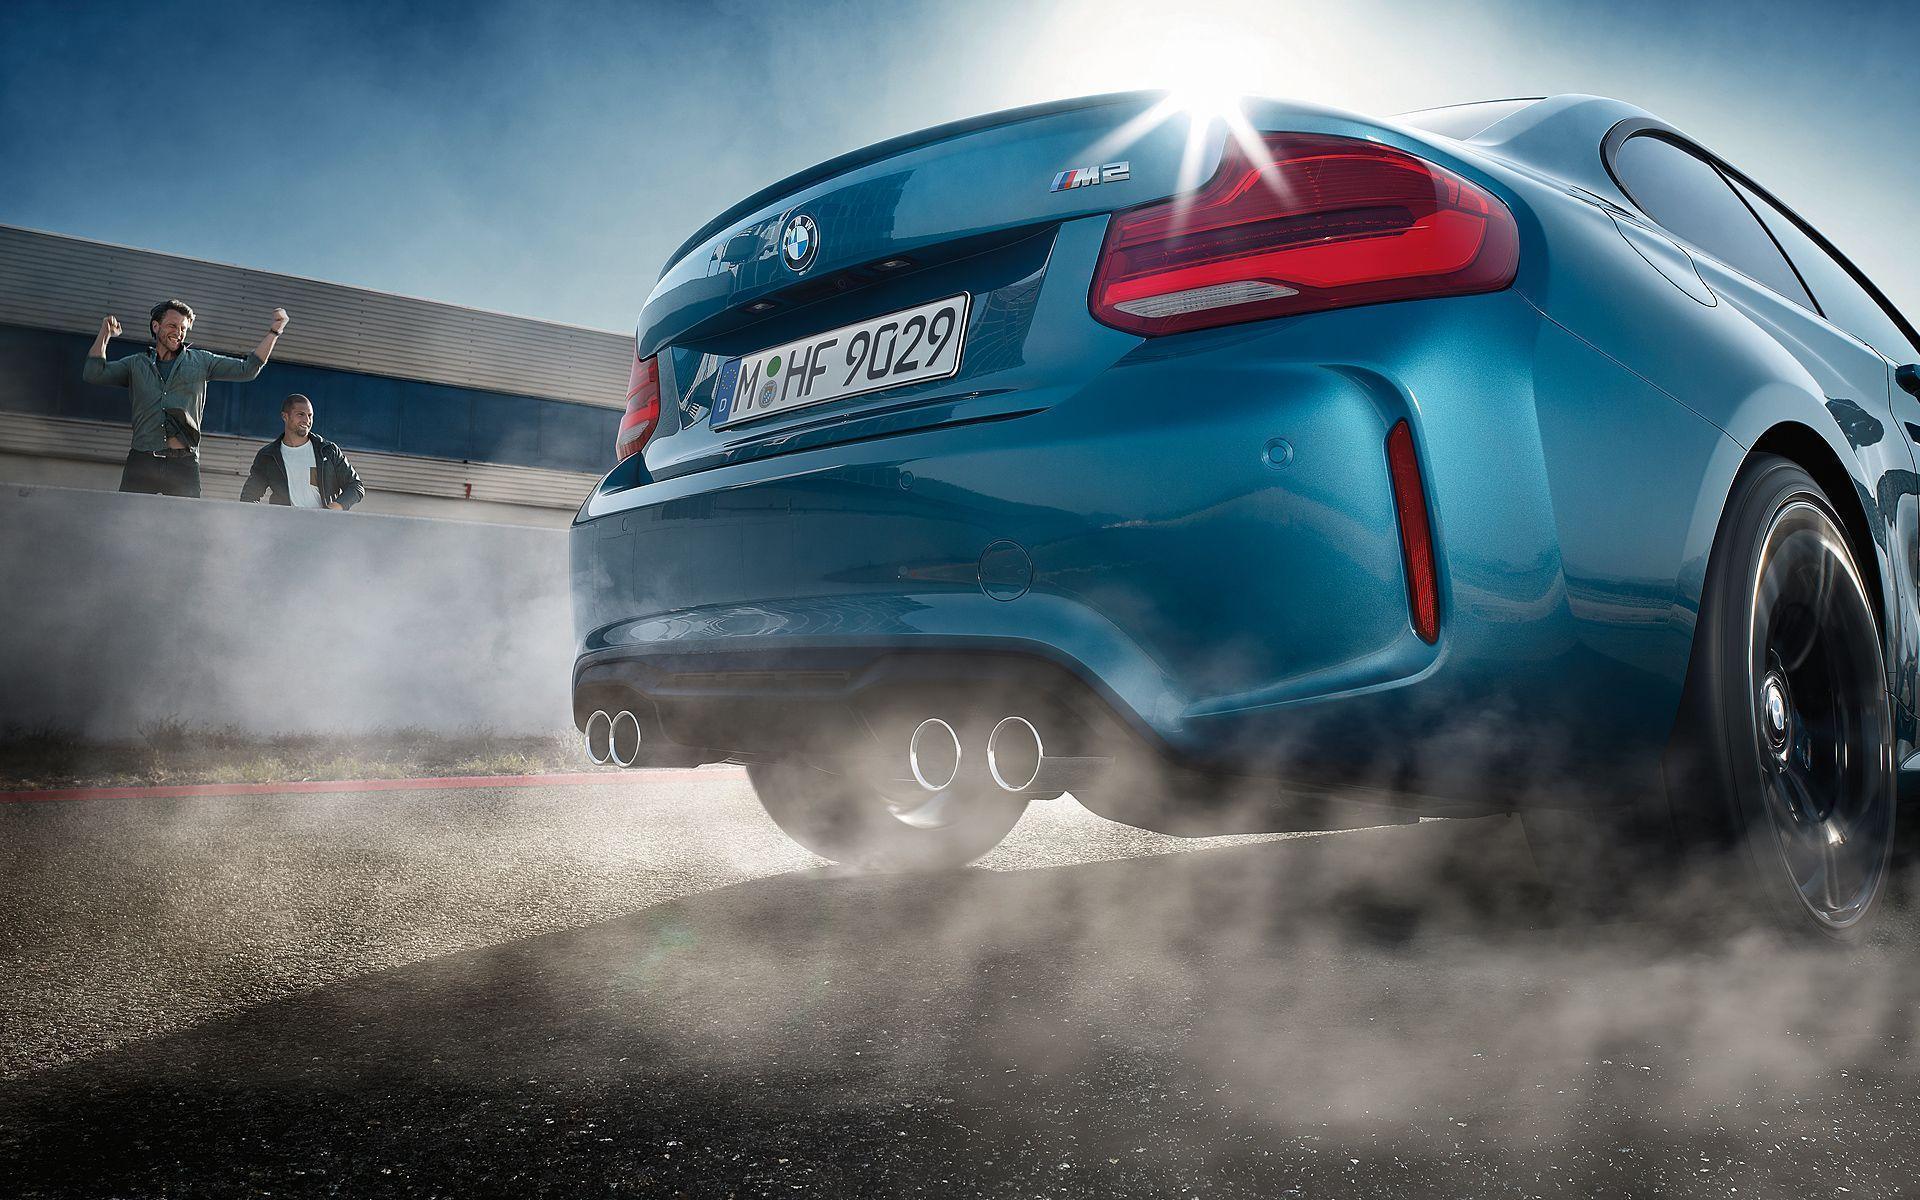 Download wallpaper of the 2017 BMW M2 Facelift